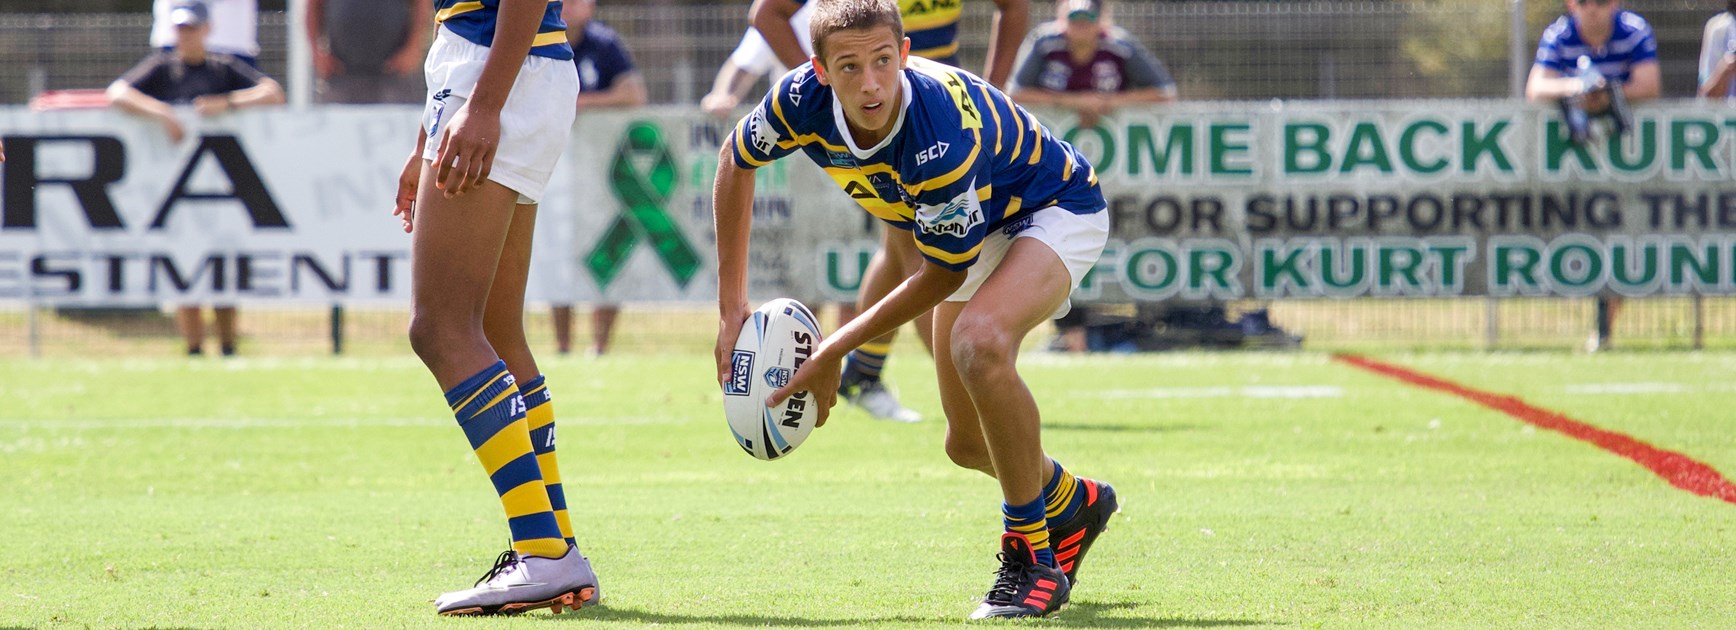 Eels Junior Rep squads named to take on Panthers